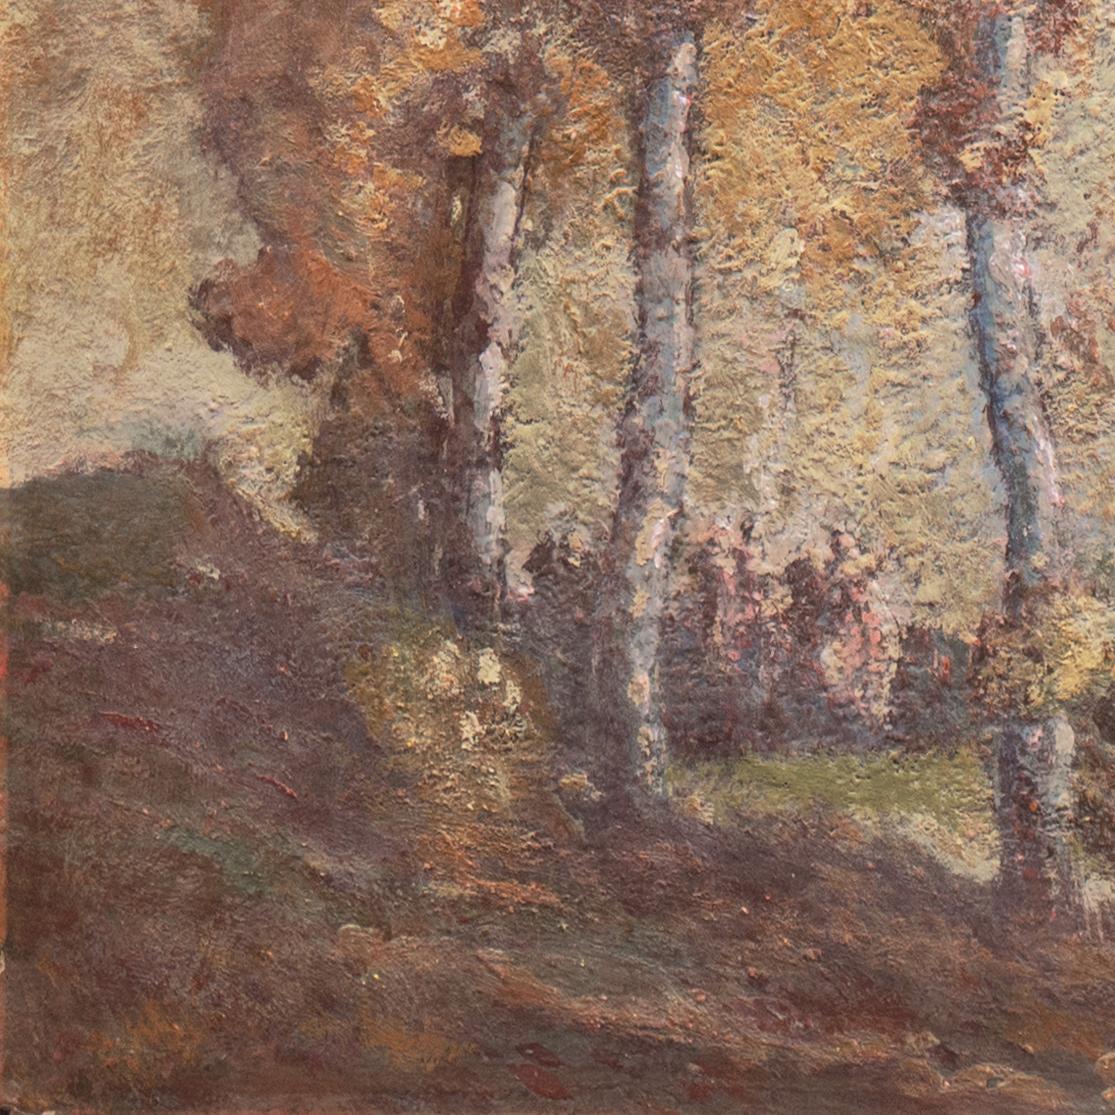 'Nymphs at Dusk', Art Nouveau, Arts and Crafts, Tonalist Oil, Three Graces, AIC - Brown Landscape Painting by William Emerson